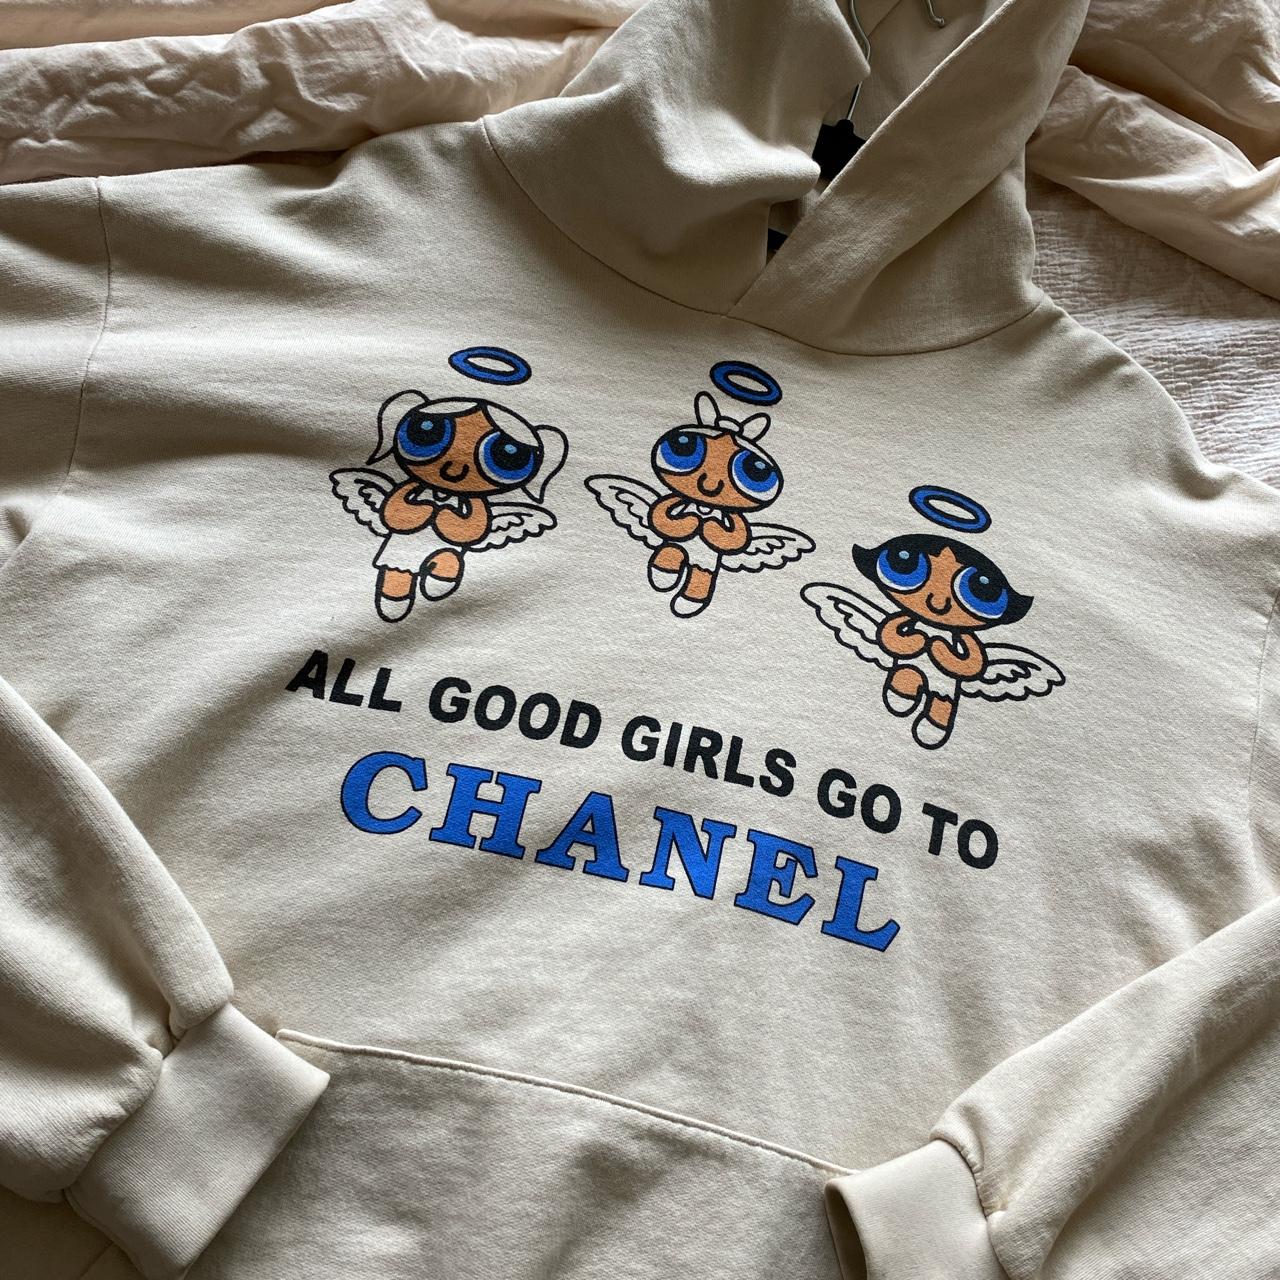 All Good Girls Go to Chanel Hoodie